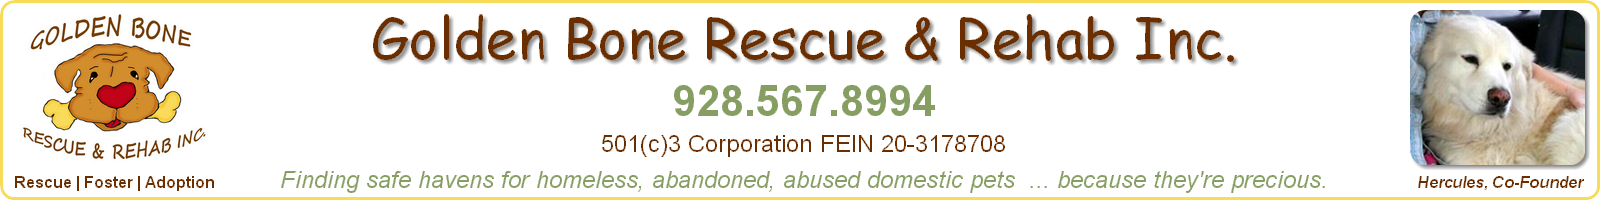 Special Pets In Need Of Medical Assistance  - Golden Bone Rescue & Rehab, Inc., Sedona, Arizona